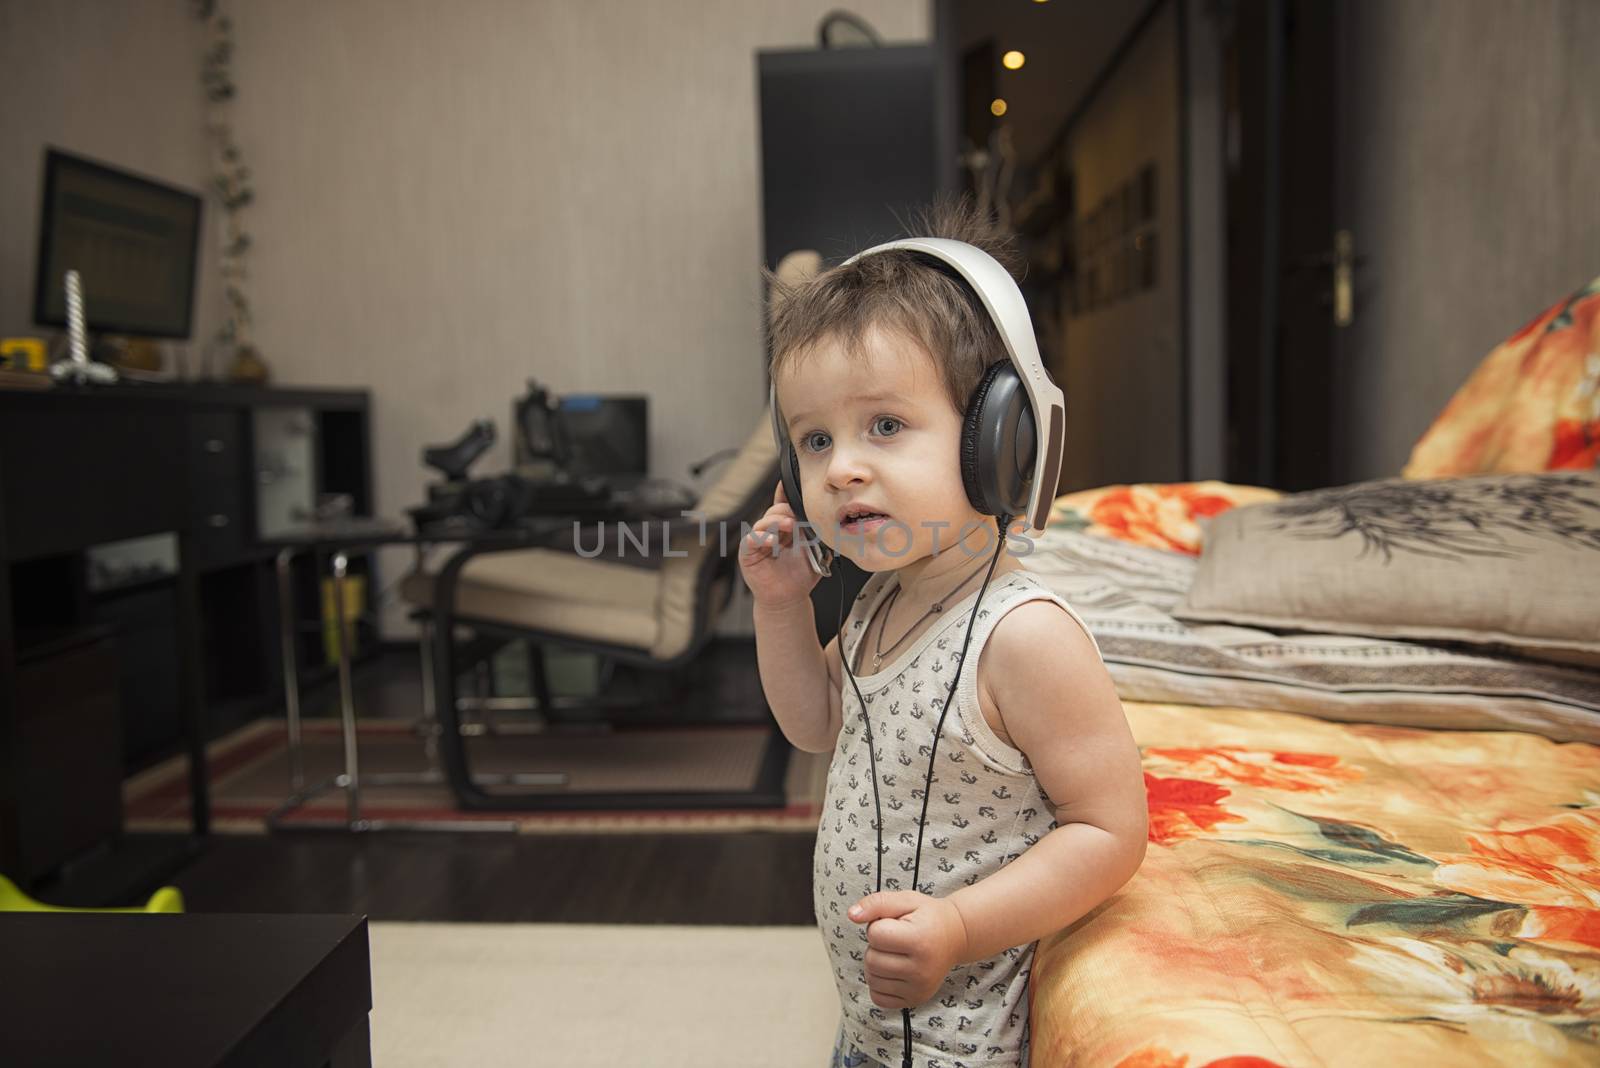 Charming boy listening to music in headphones by marynkin